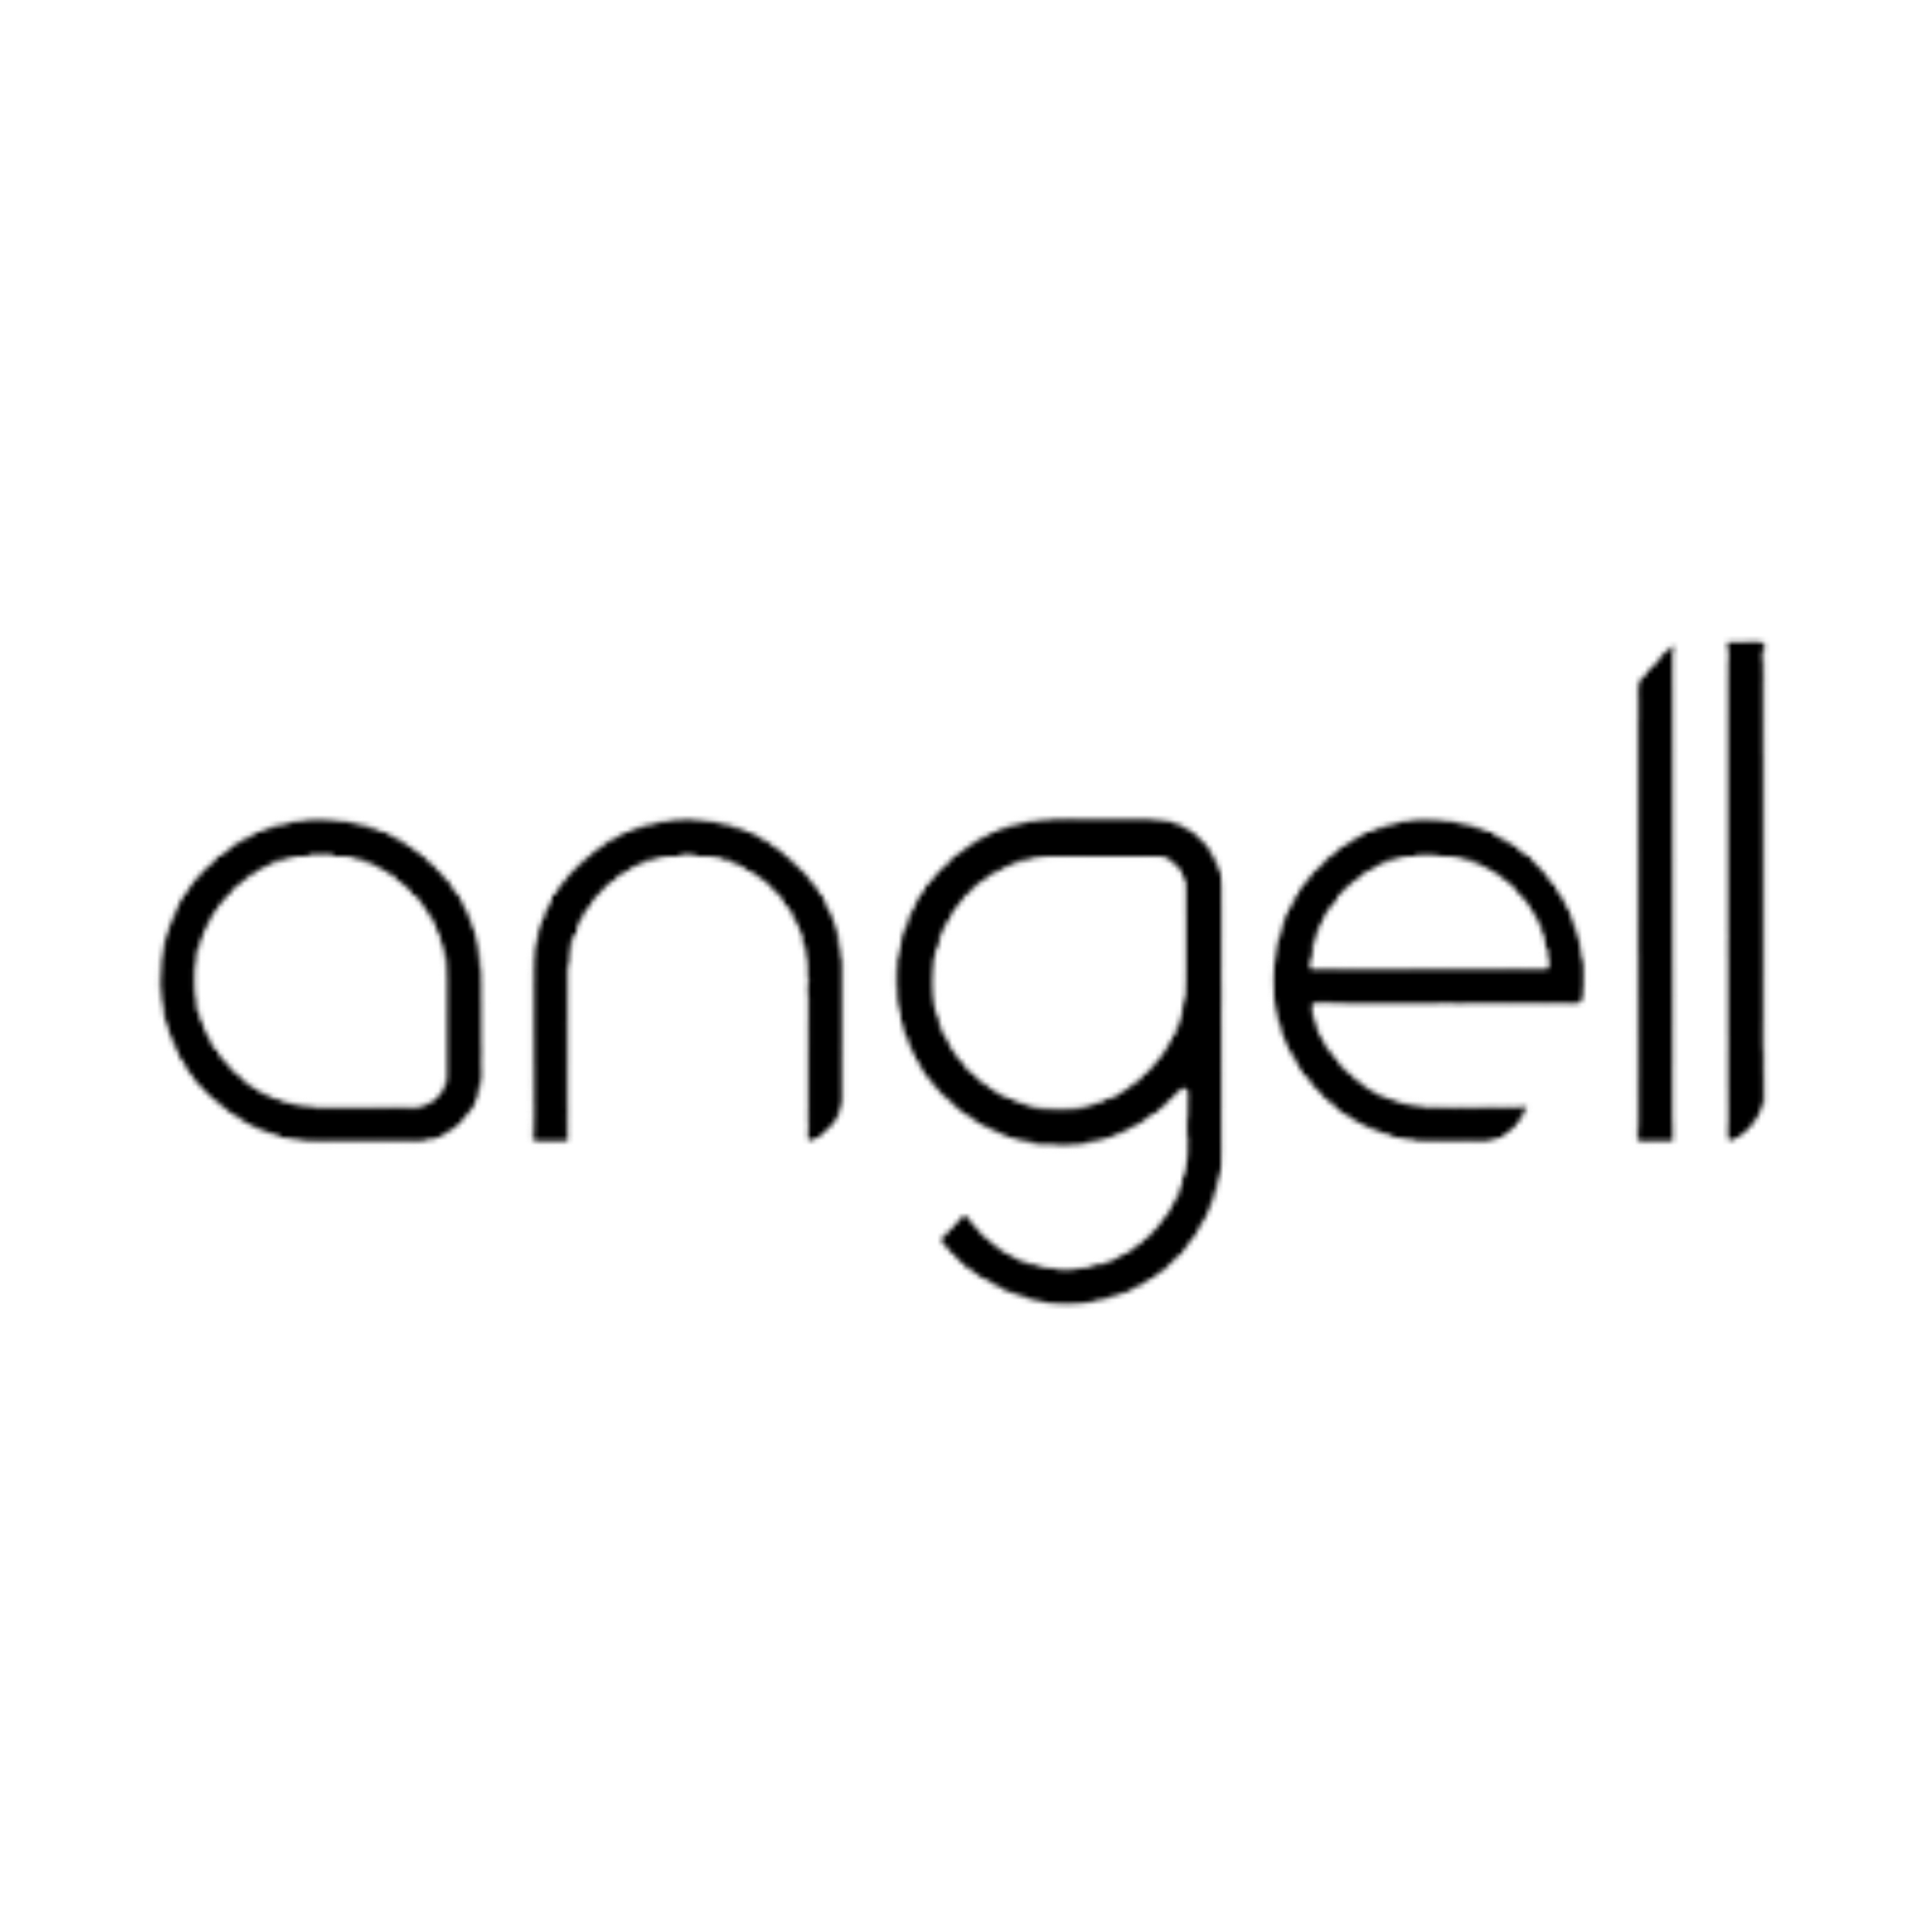 Angell logo png